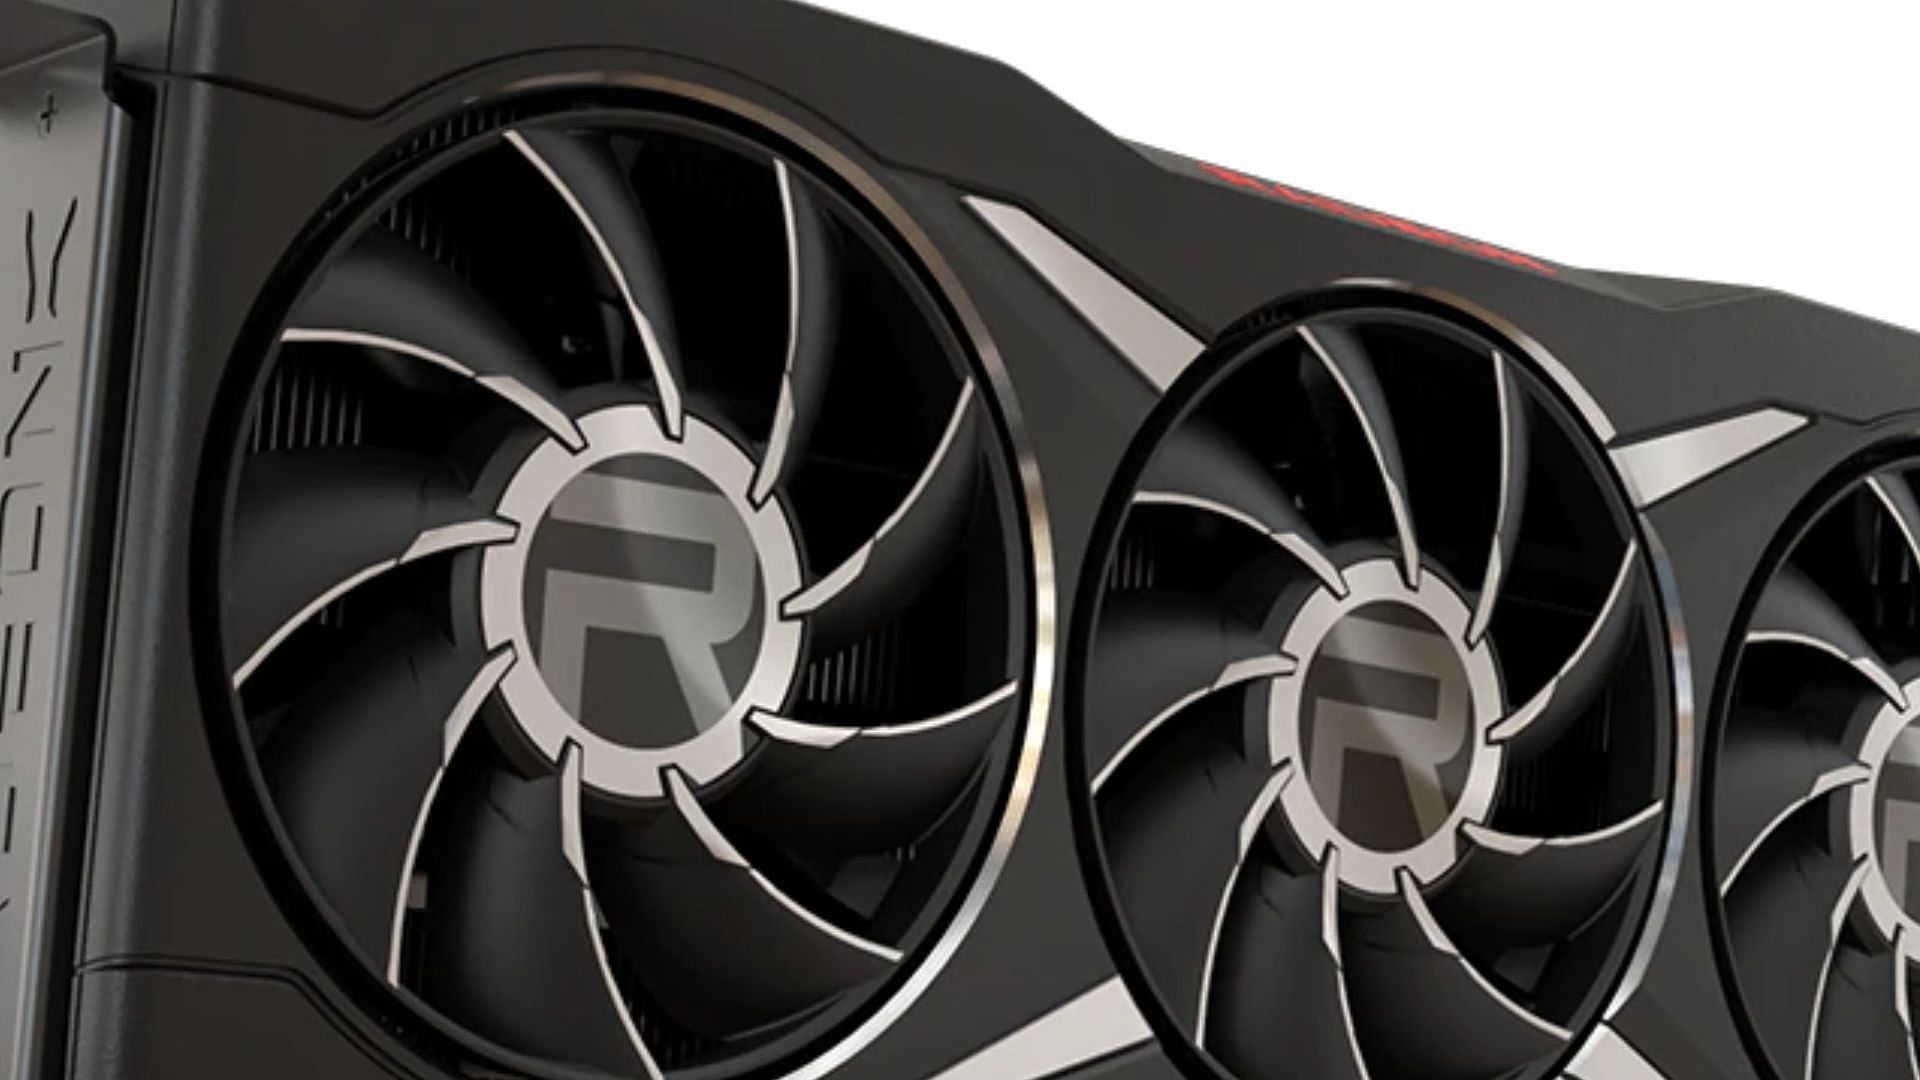 Radeon RX 7800 XT Sells Twice as Much as the NVIDIA RTX 4070 in Europe